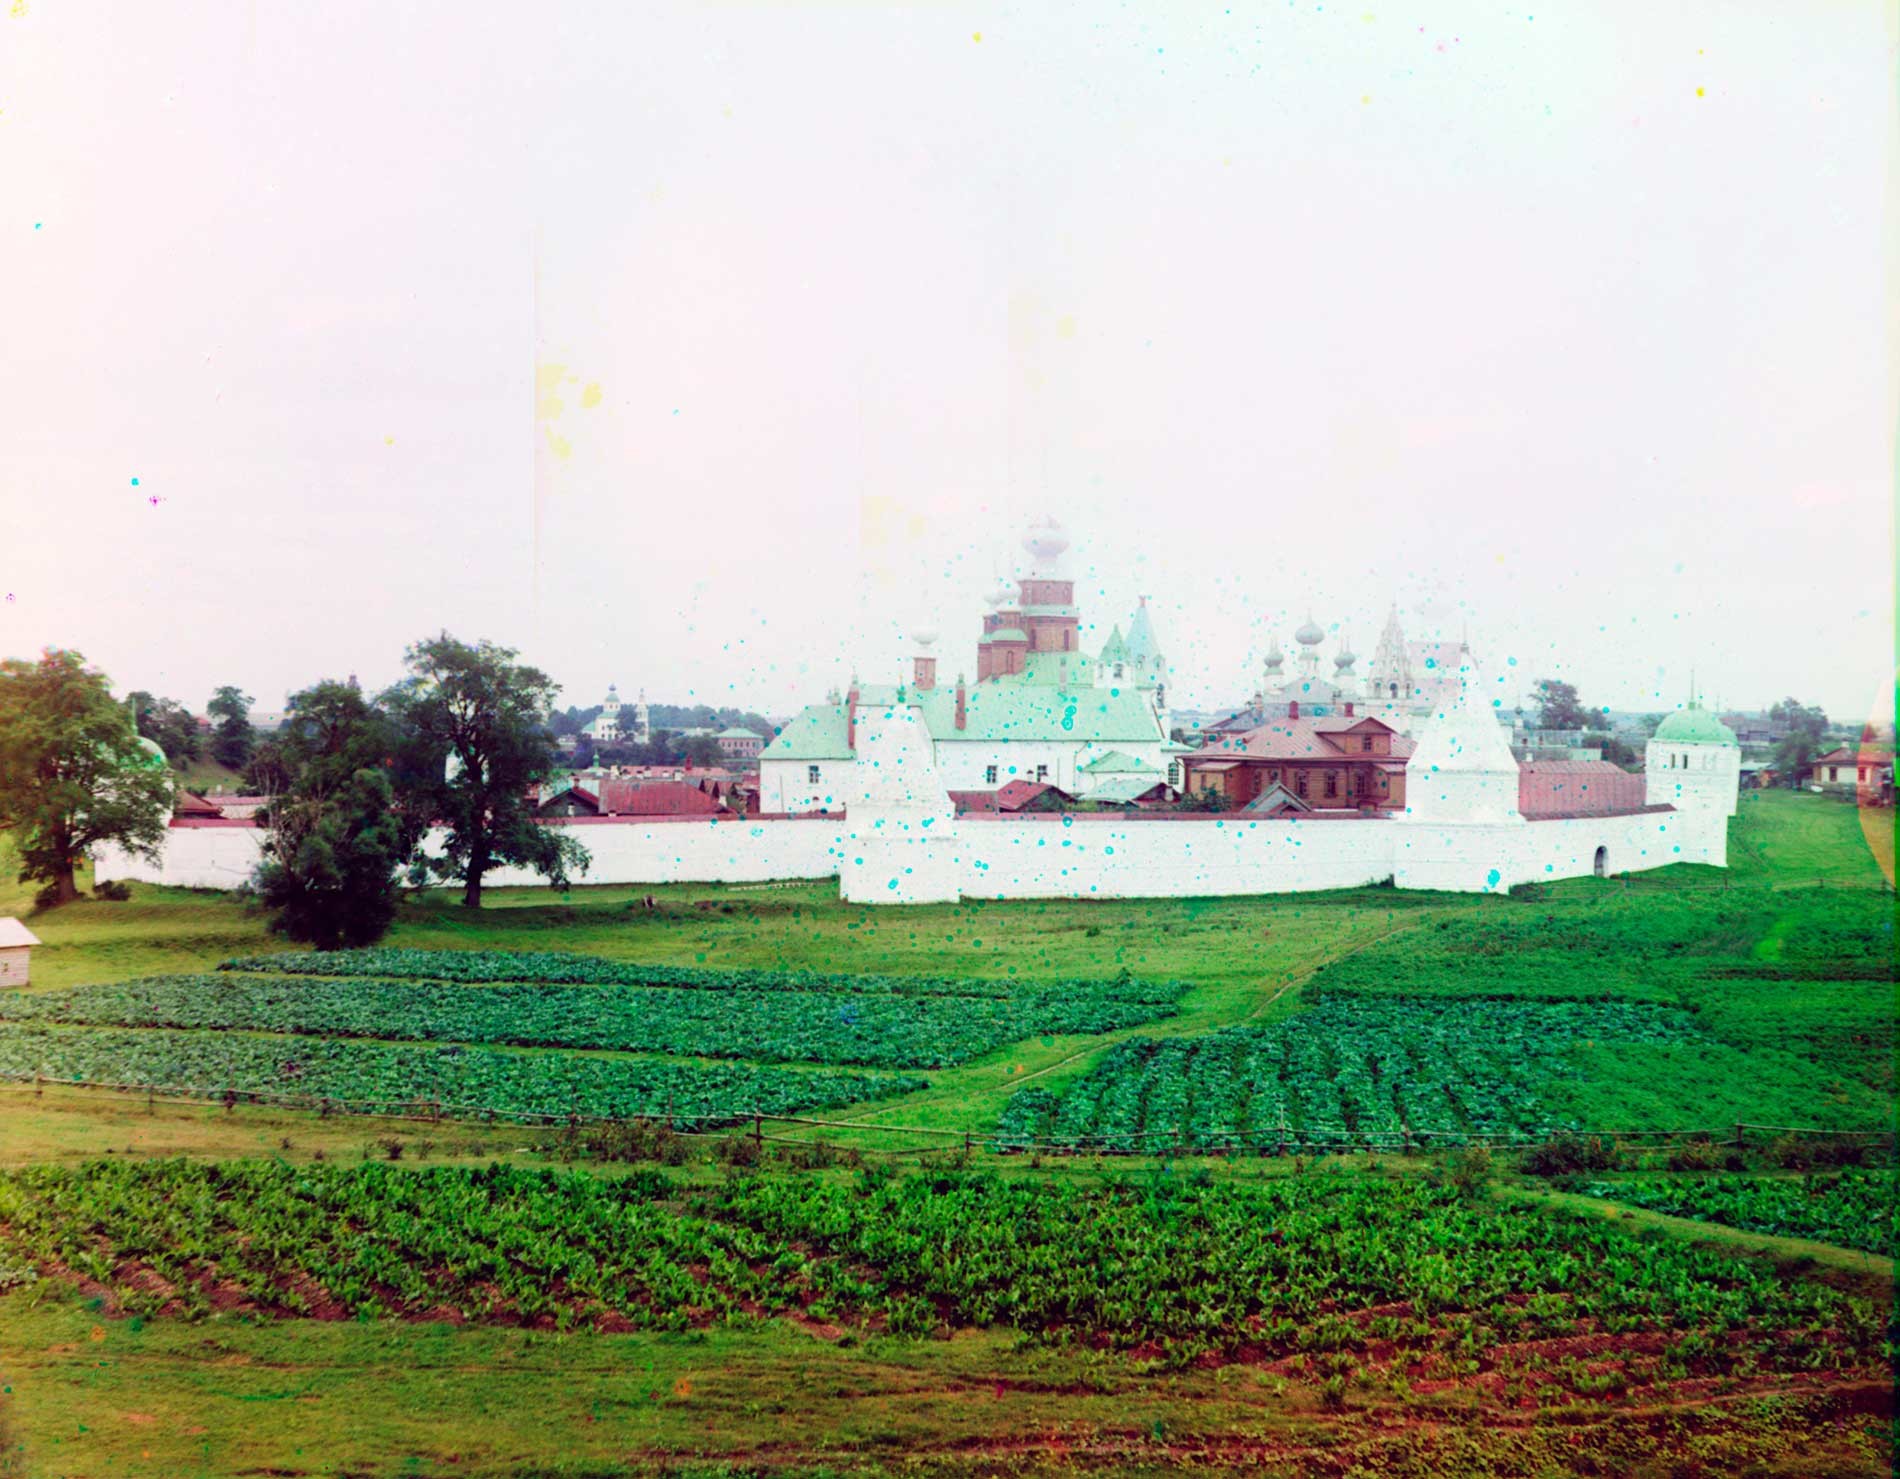 Intercession Convent, north view. Center: Church of St. Anne & ​Intercession Cathedral with three domes. Right: Church of Sts. Peter&Paul (beyond convent). Foreground: potato plots. Summer 1912